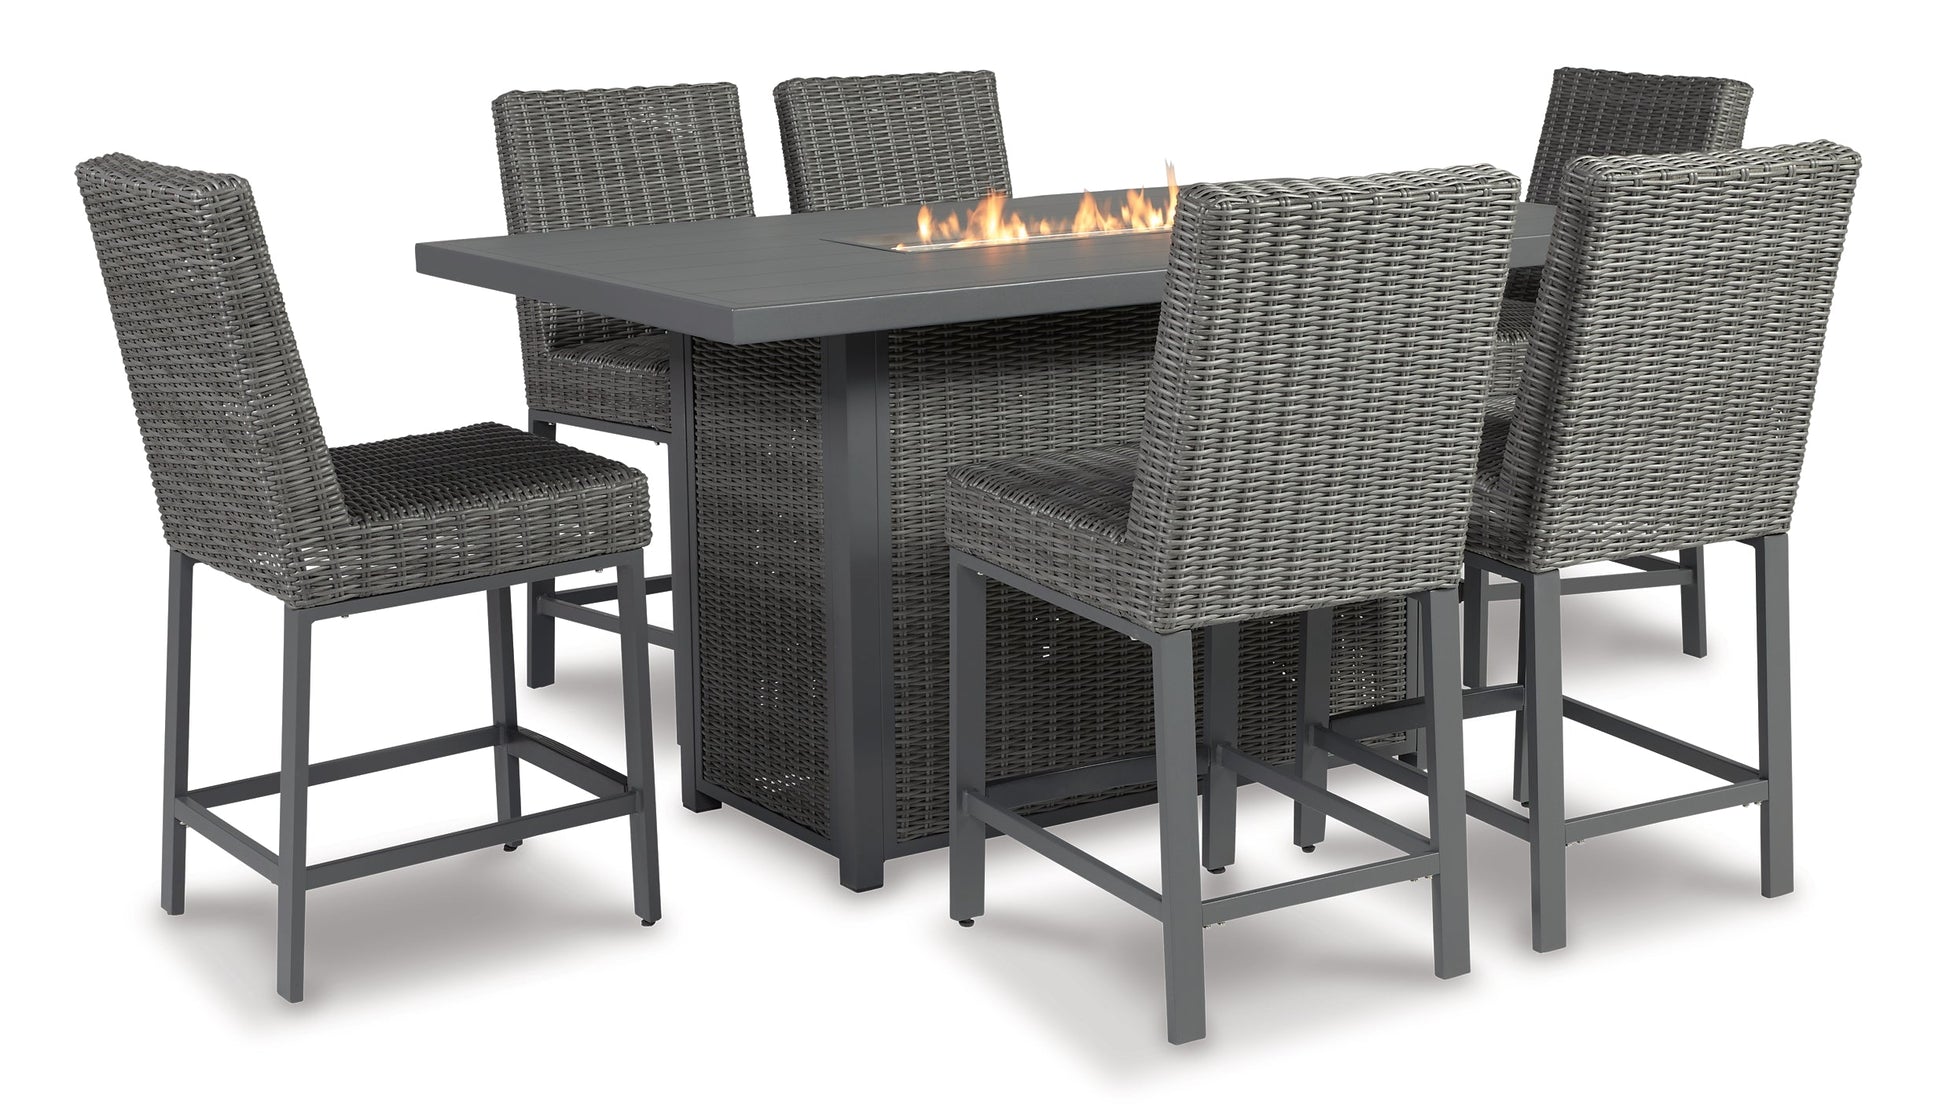 Palazzo Outdoor Fire Pit Table and 4 Chairs at Walker Mattress and Furniture Locations in Cedar Park and Belton TX.